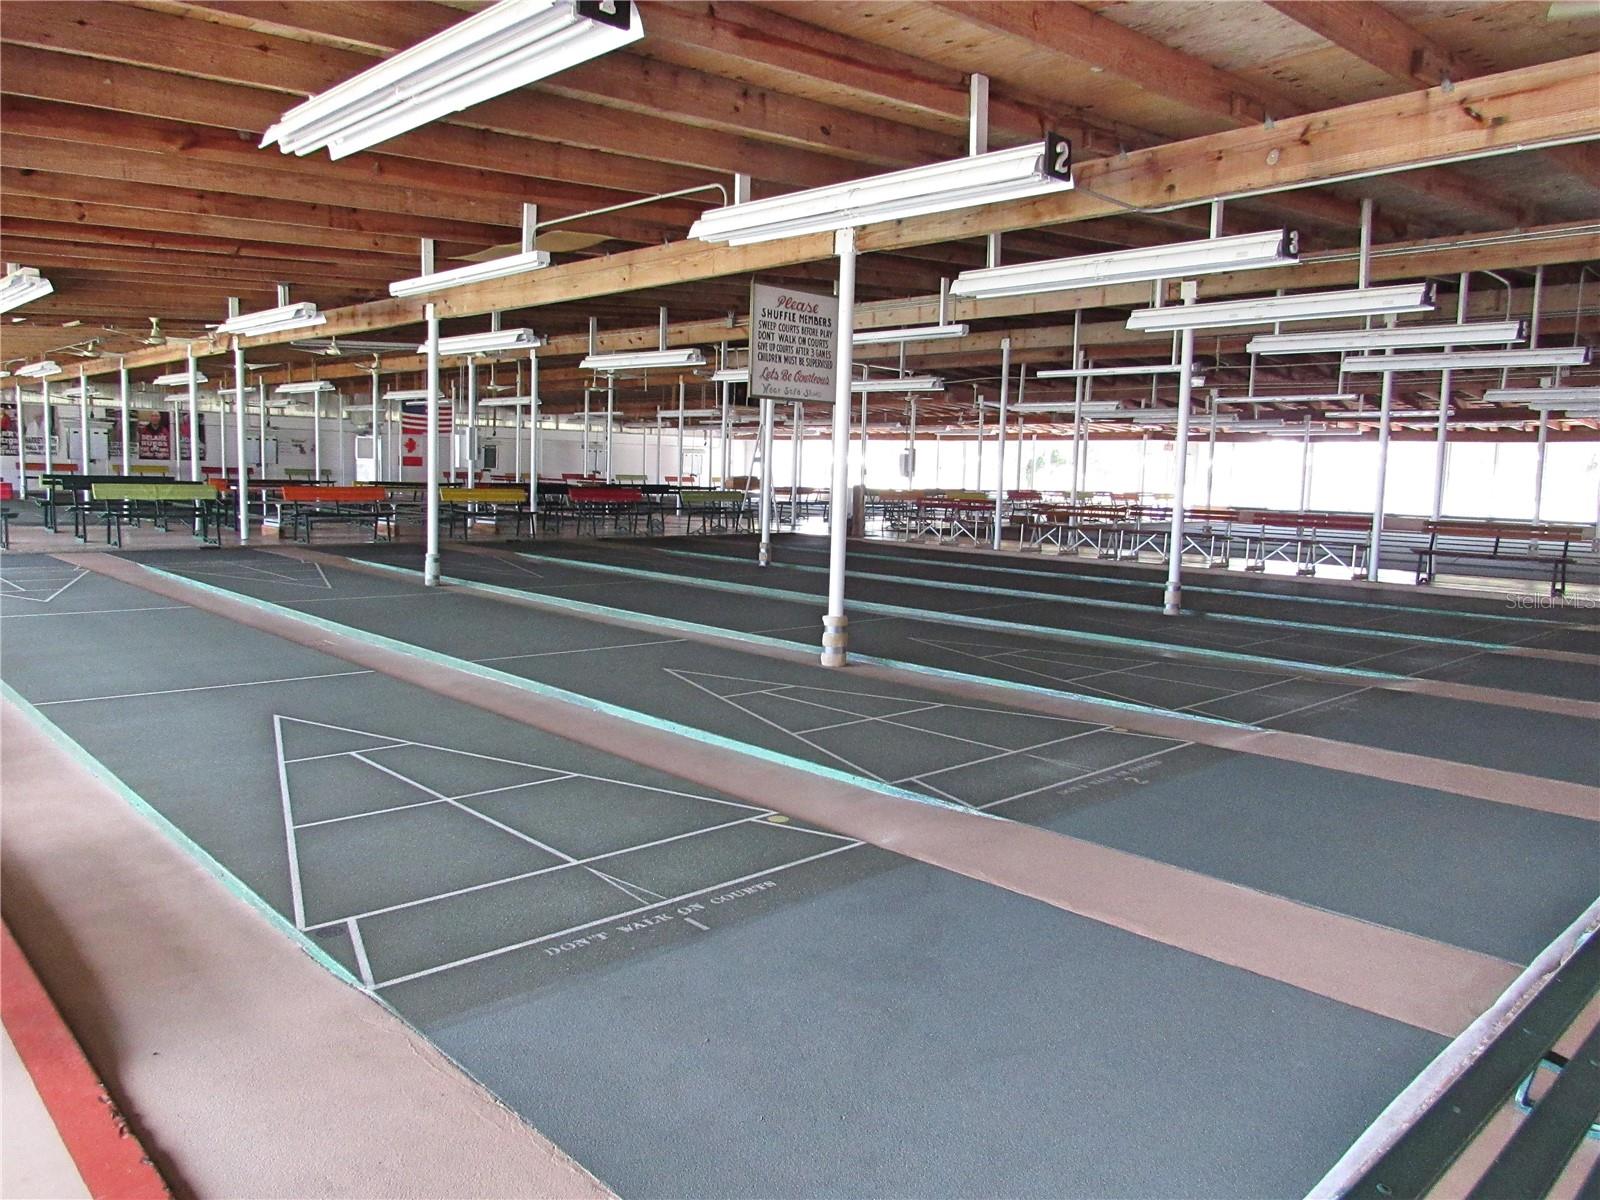 24 covered shuffleboard courts